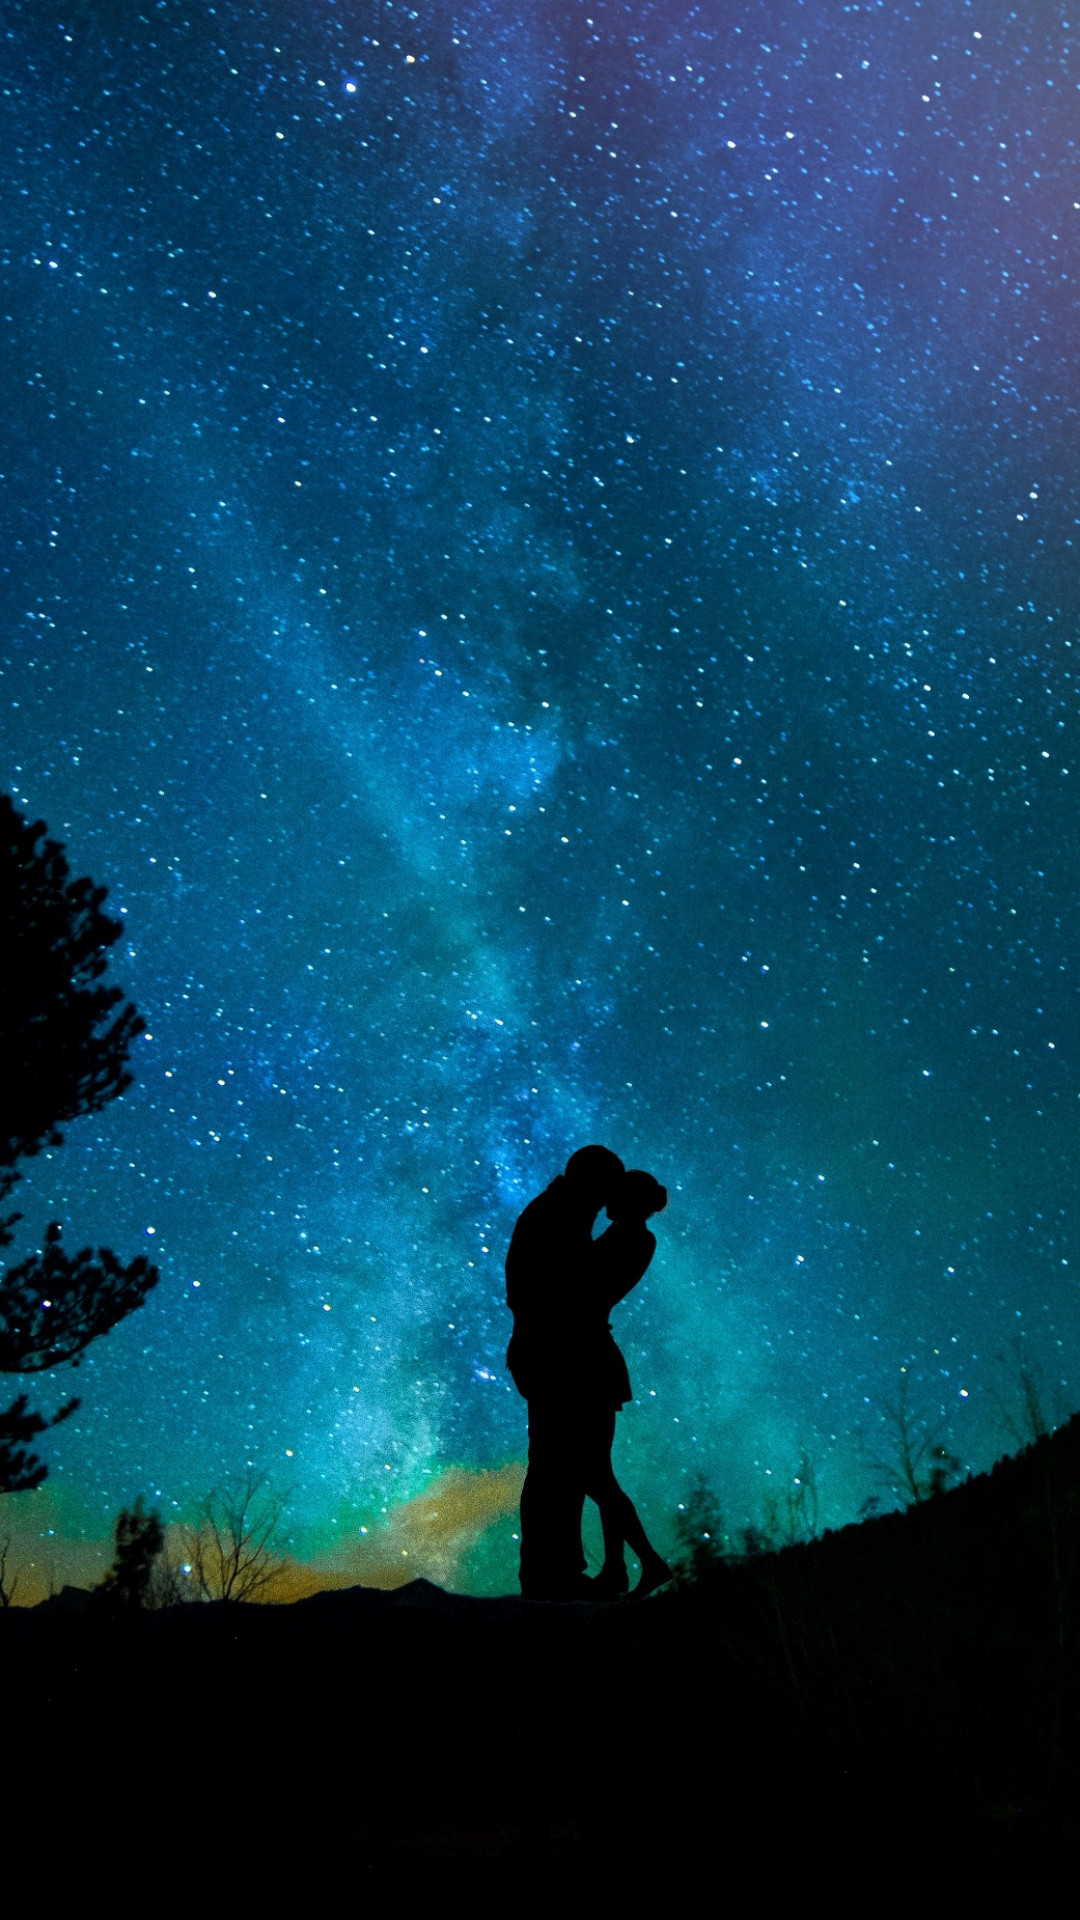 Stock Images love image, kiss, night, sky, stars, 4k, Stock Images #16931